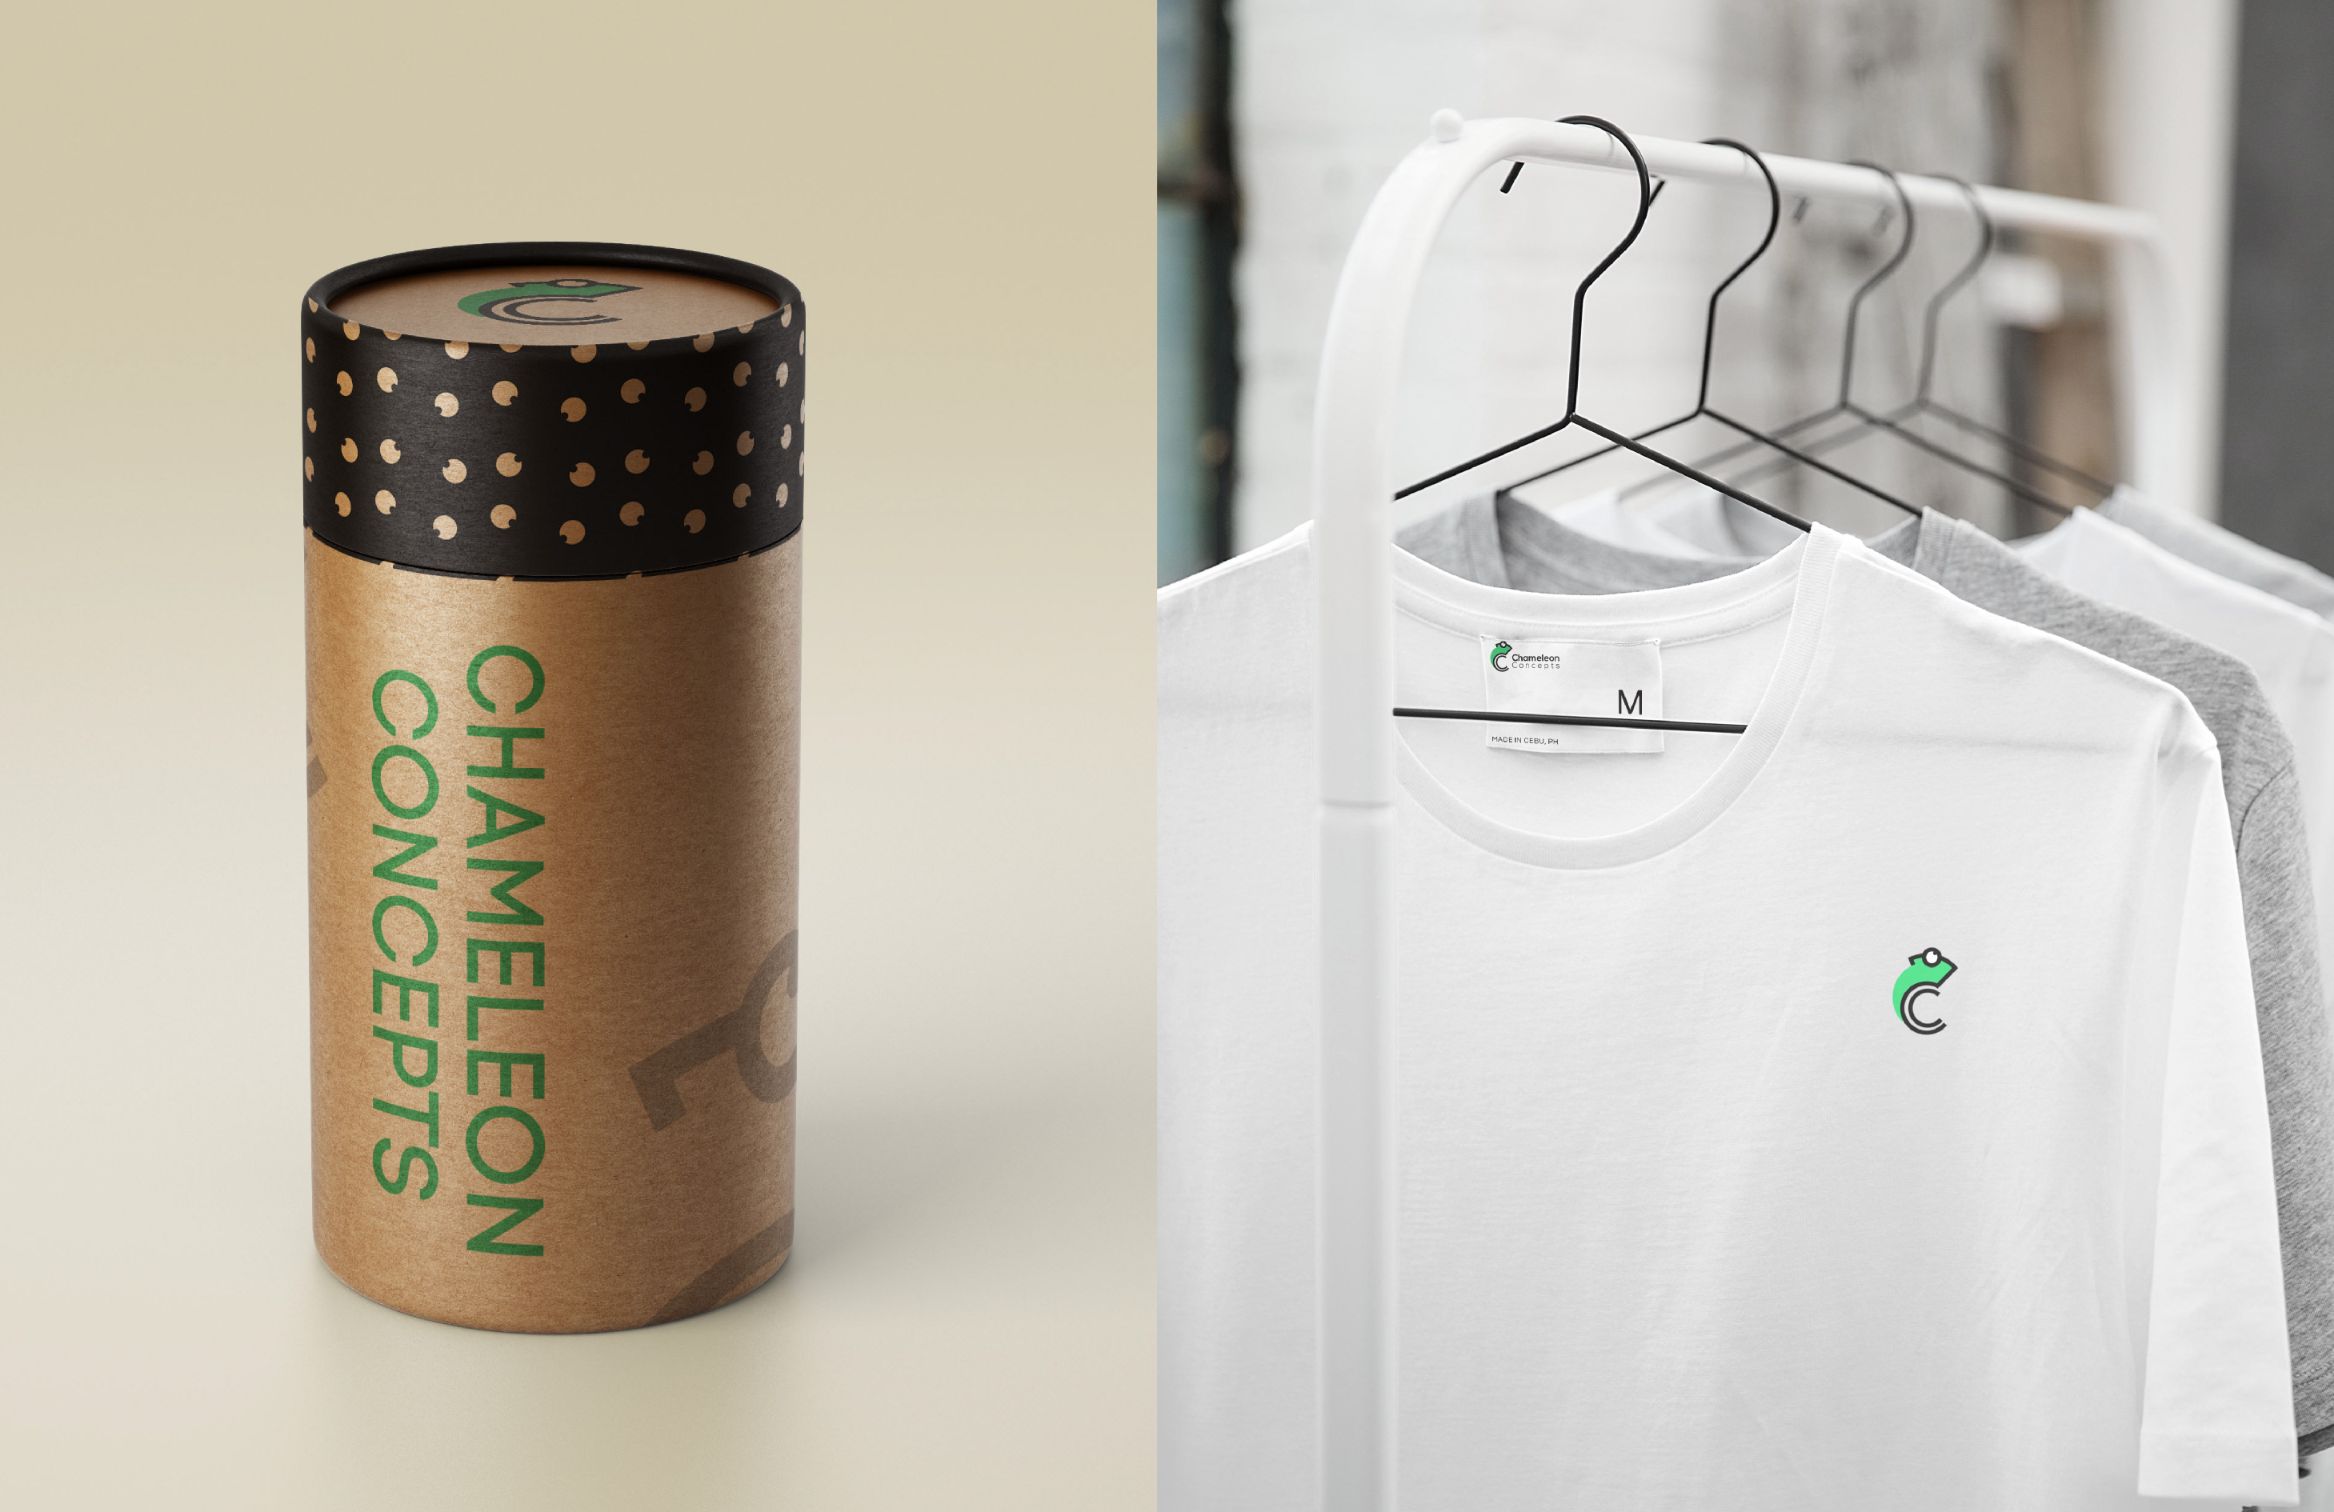 An image of a white t-shirt print with the logo on it and an image of a paper roll with the logo on it